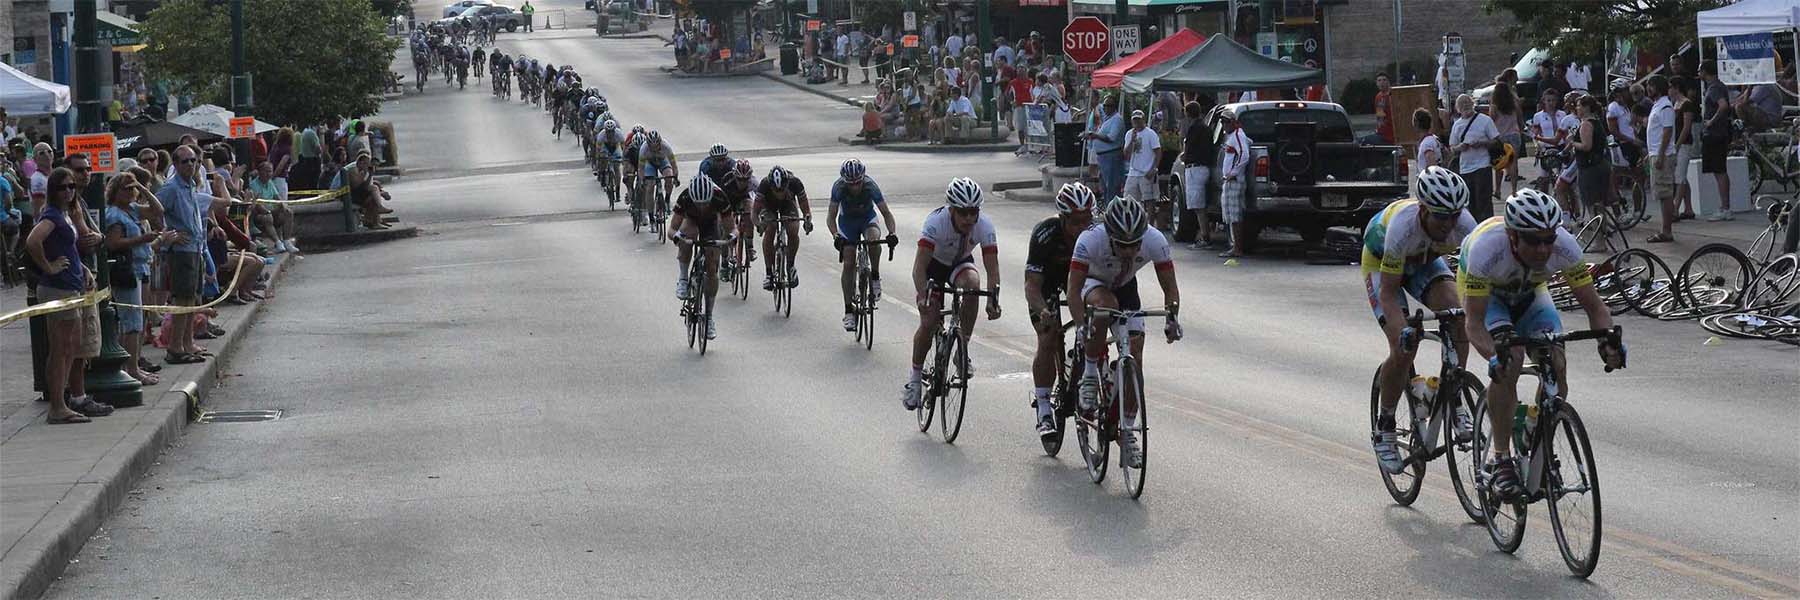 cycling race in downtown